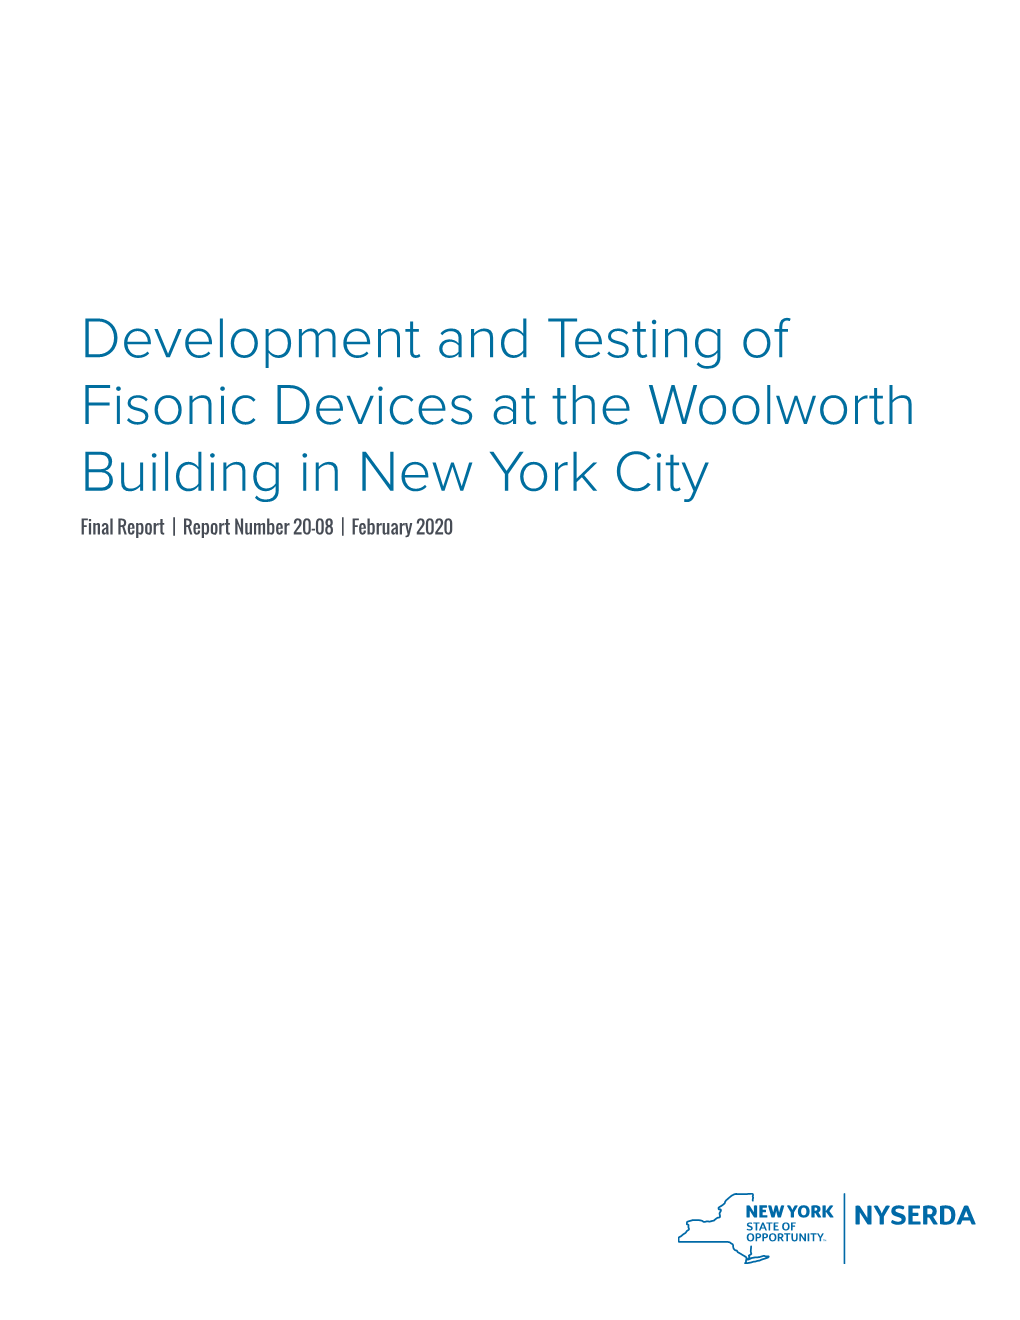 Development and Testing of Fisonic Devices at the Woolworth Building in New York City